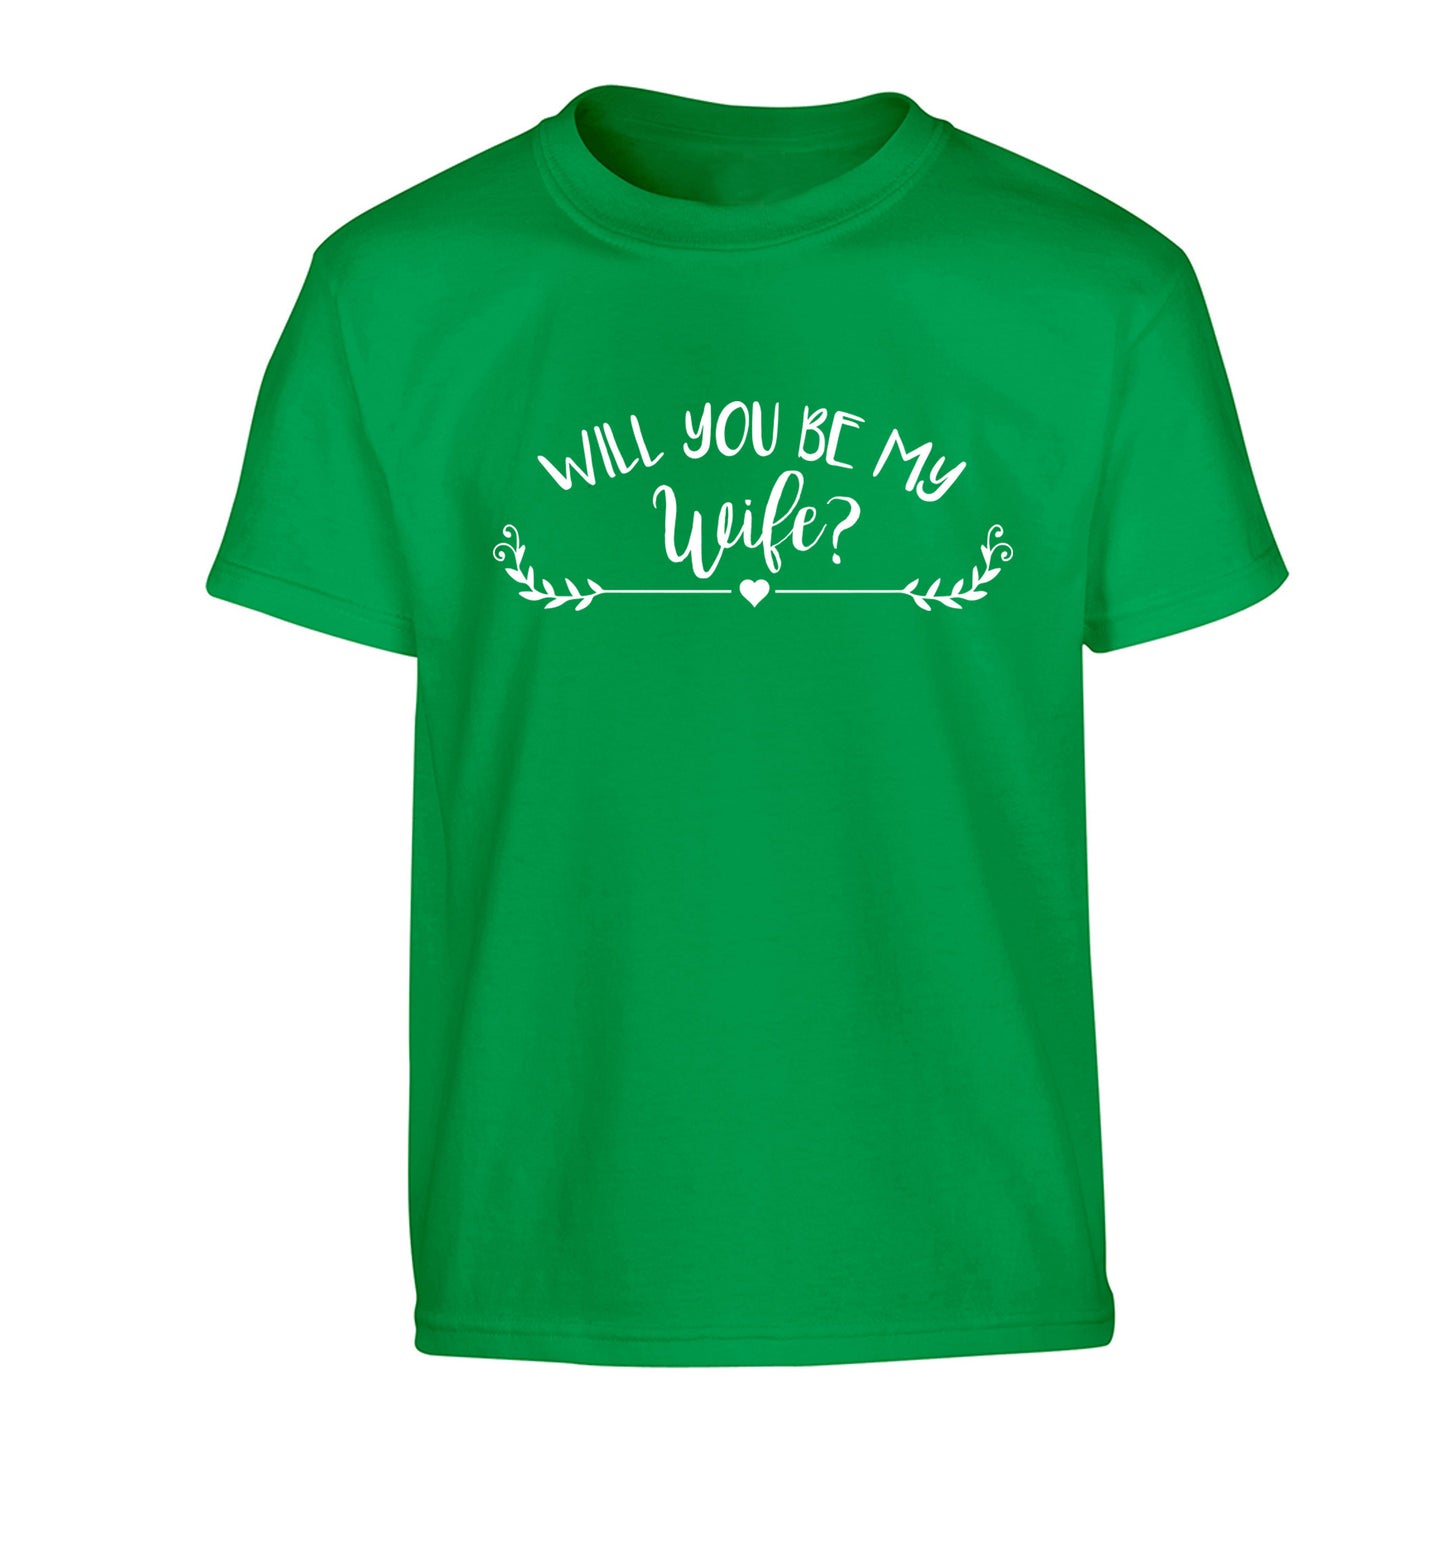 Will you be my wife? Children's green Tshirt 12-14 Years